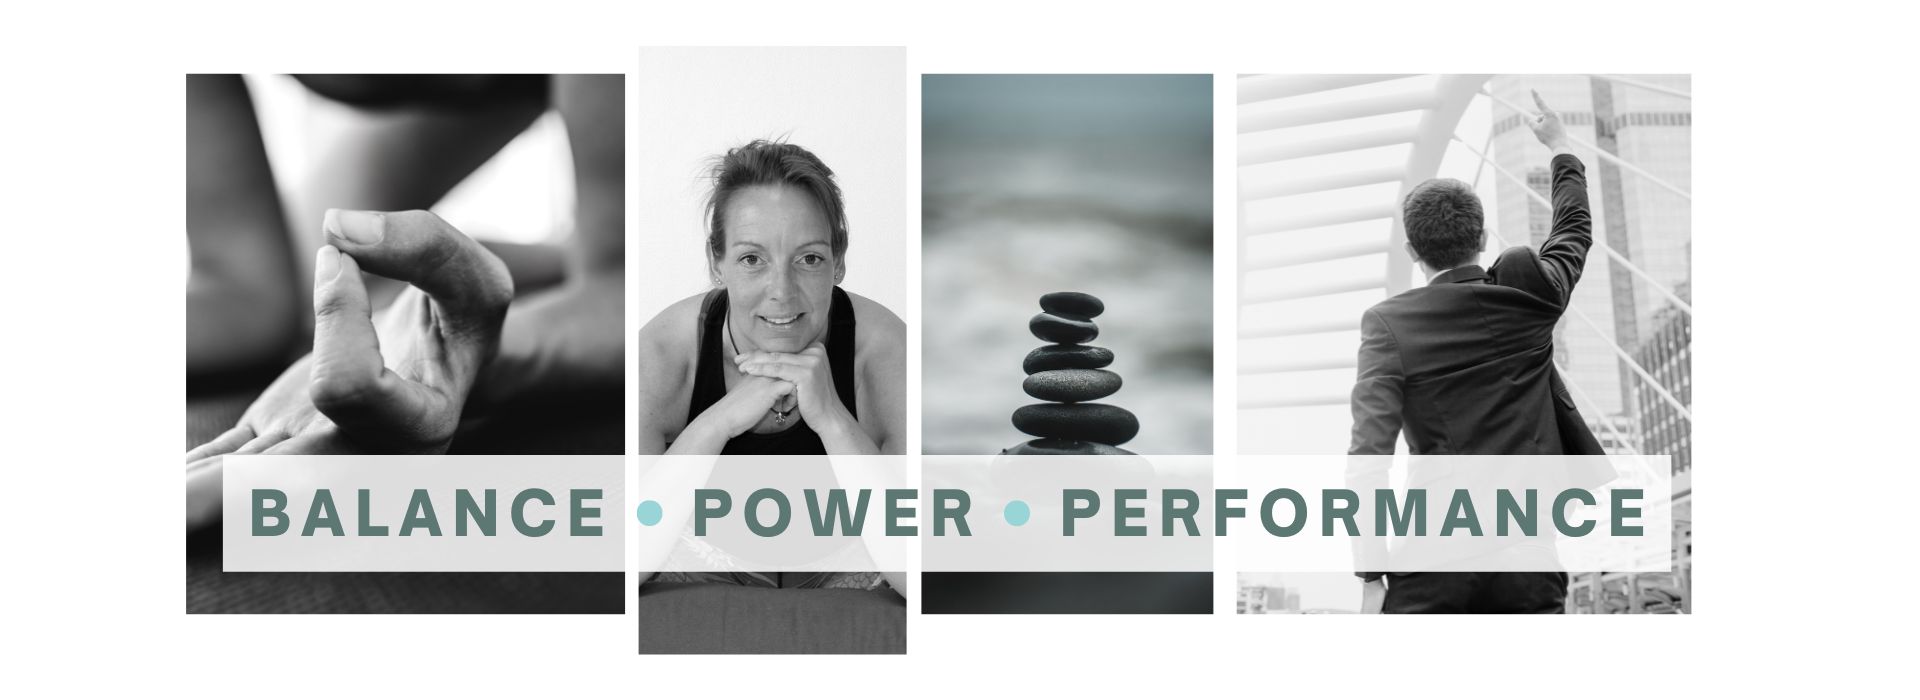 From burnout to badass, empowering business professionals to create inner calm in outer chaos!